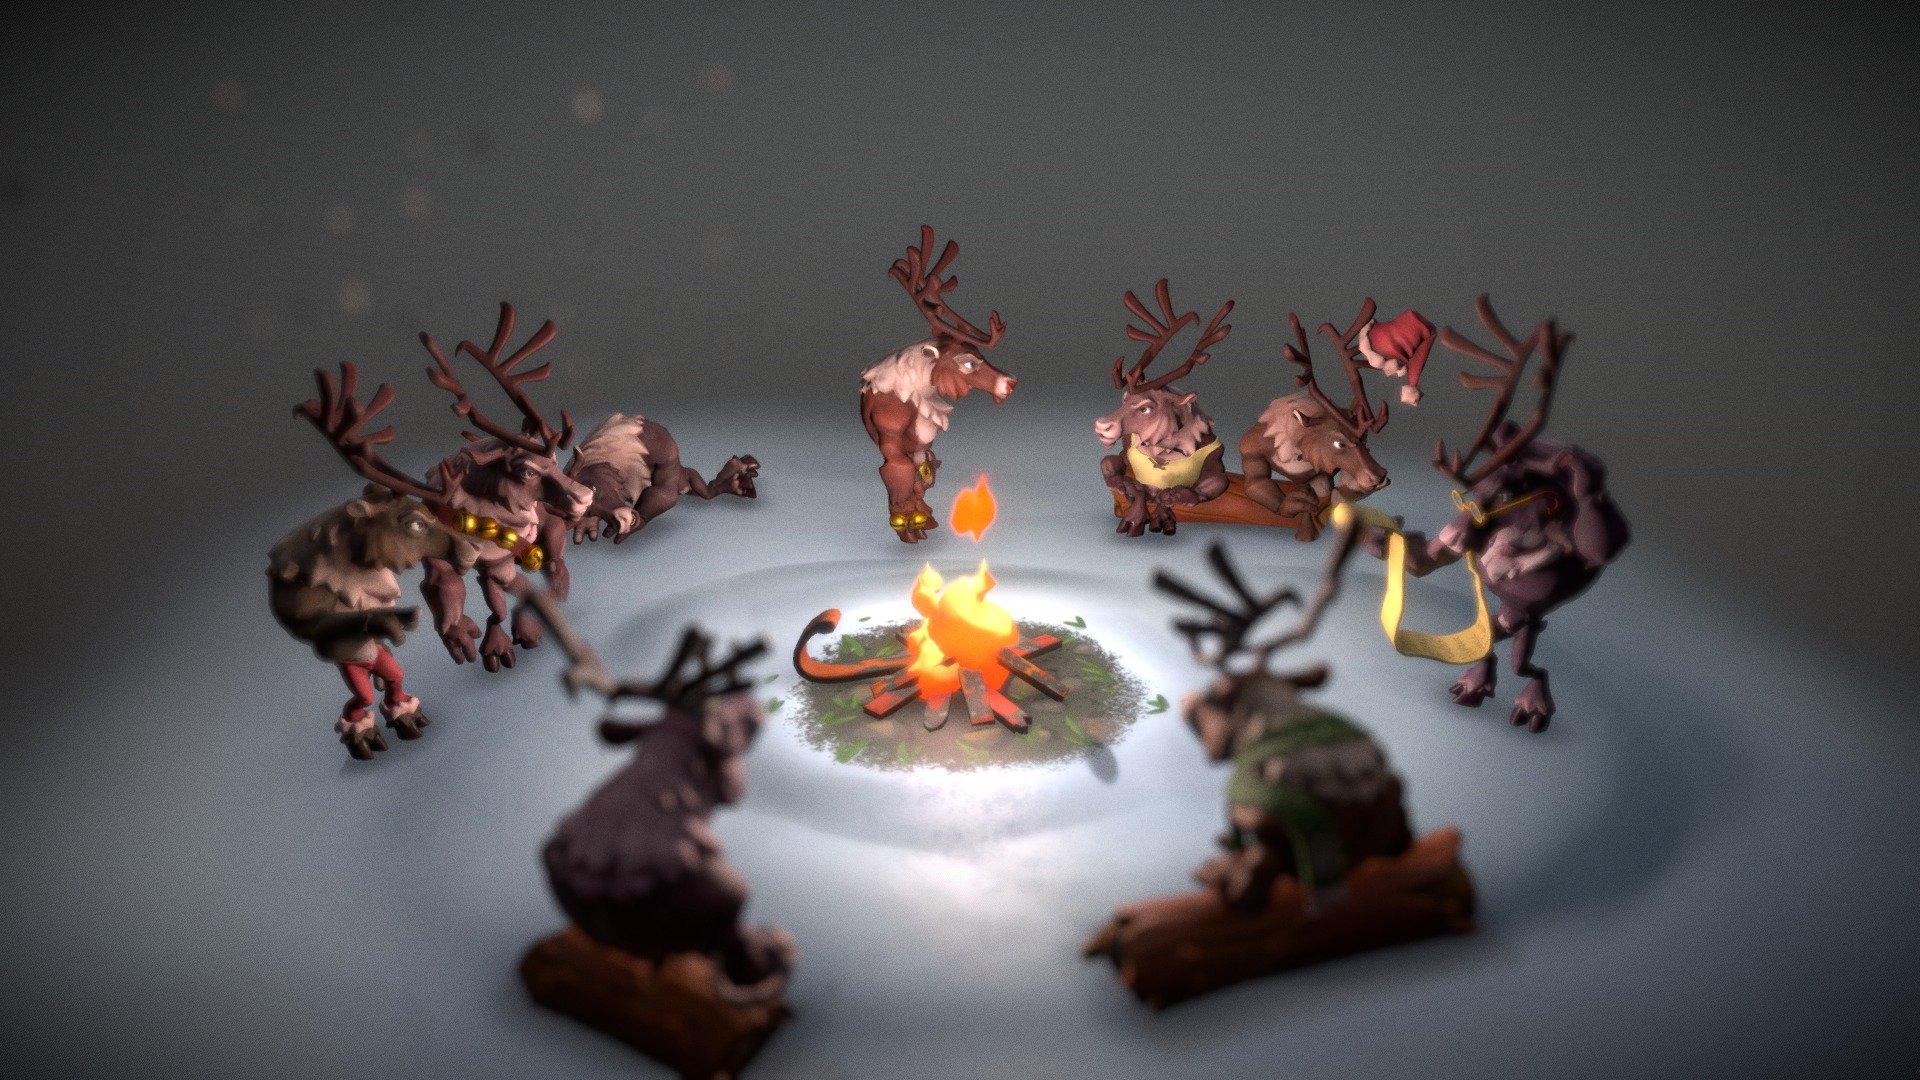 Collab work with https://sketchfab.com/ttyana
Made for Batrat Art Challenge hosted by Max Grecke - Christmas Reindeer scene - 3D model by Alexey Burmak (@sao256k) 3d model